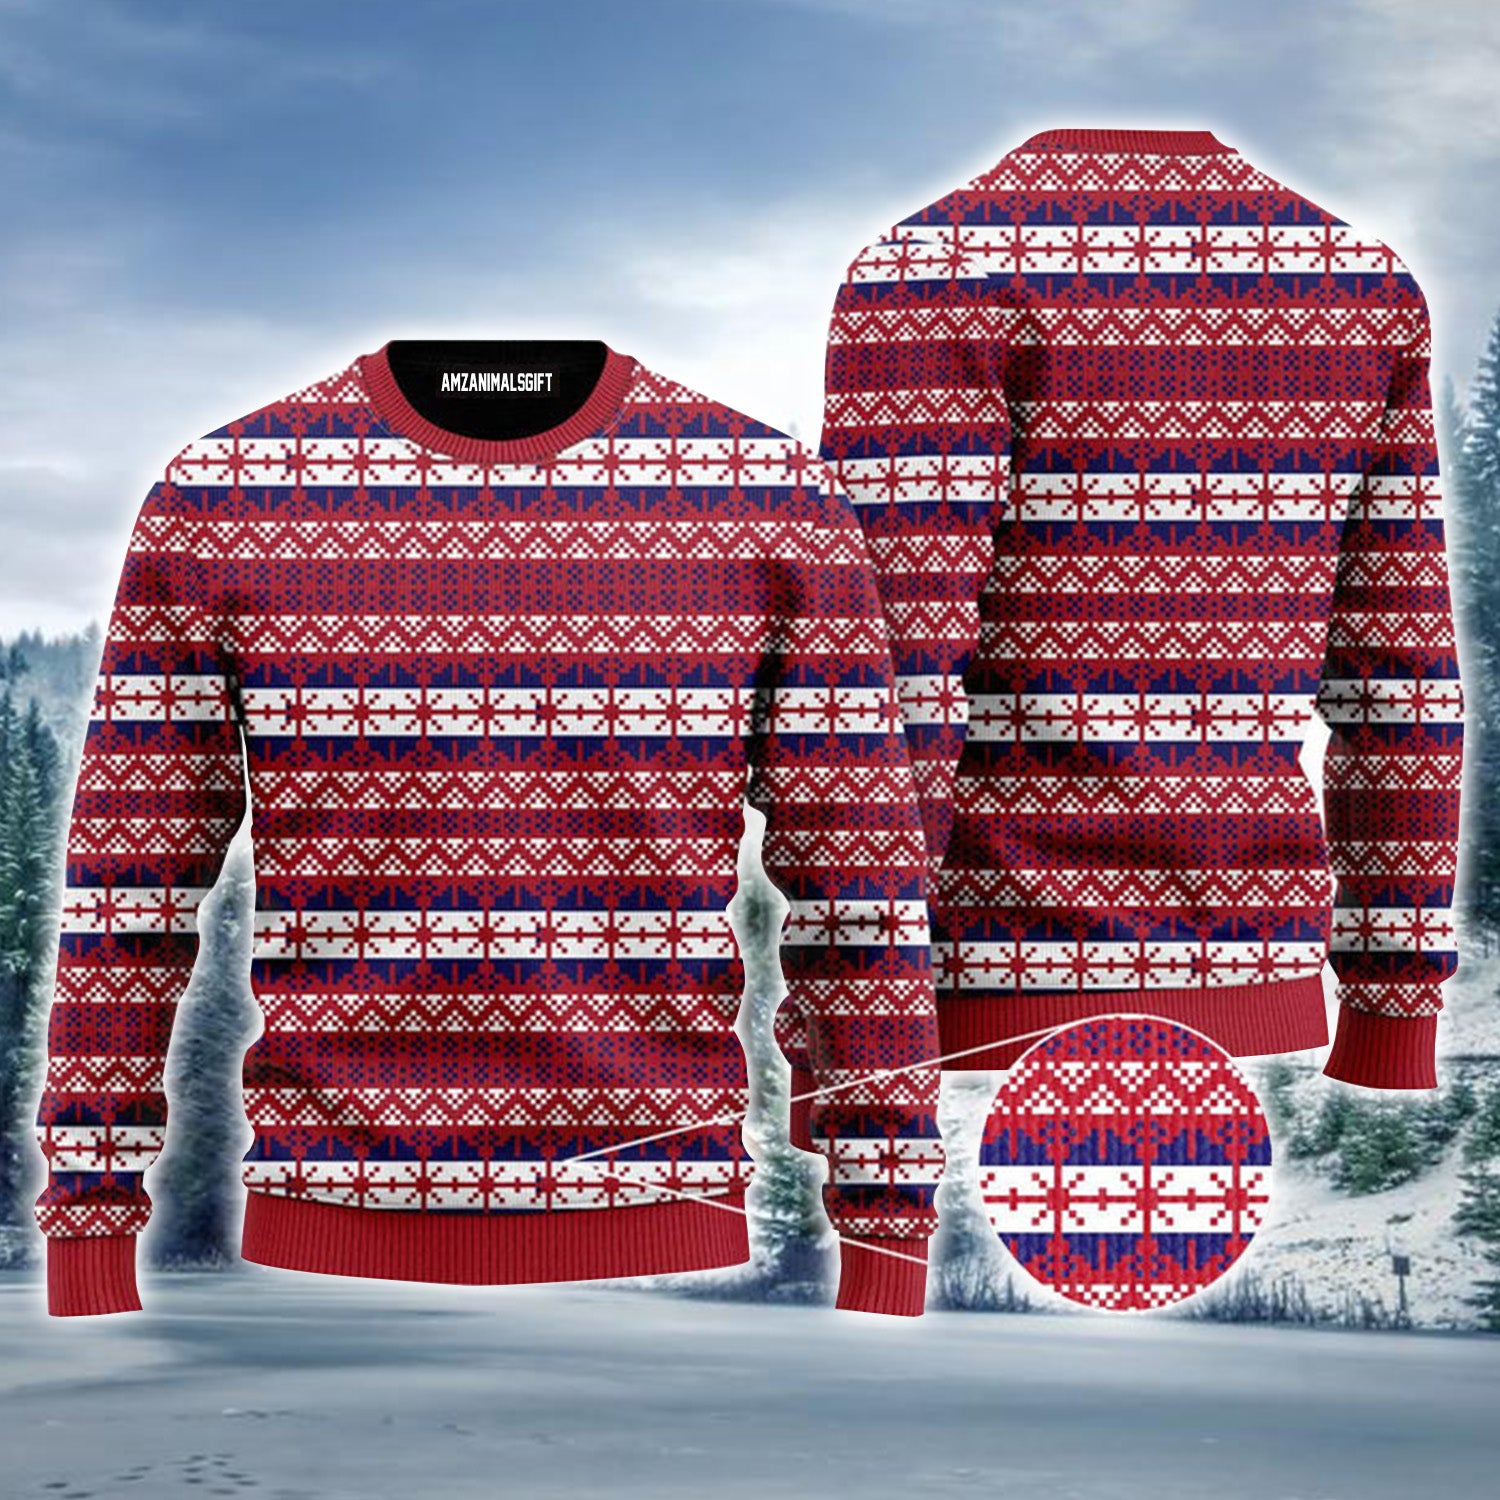 Red Fancy Xmas Pattern Urly Christmas Sweater, Christmas Sweater For Men & Women - Perfect Gift For Christmas, New Year, Winter Holiday